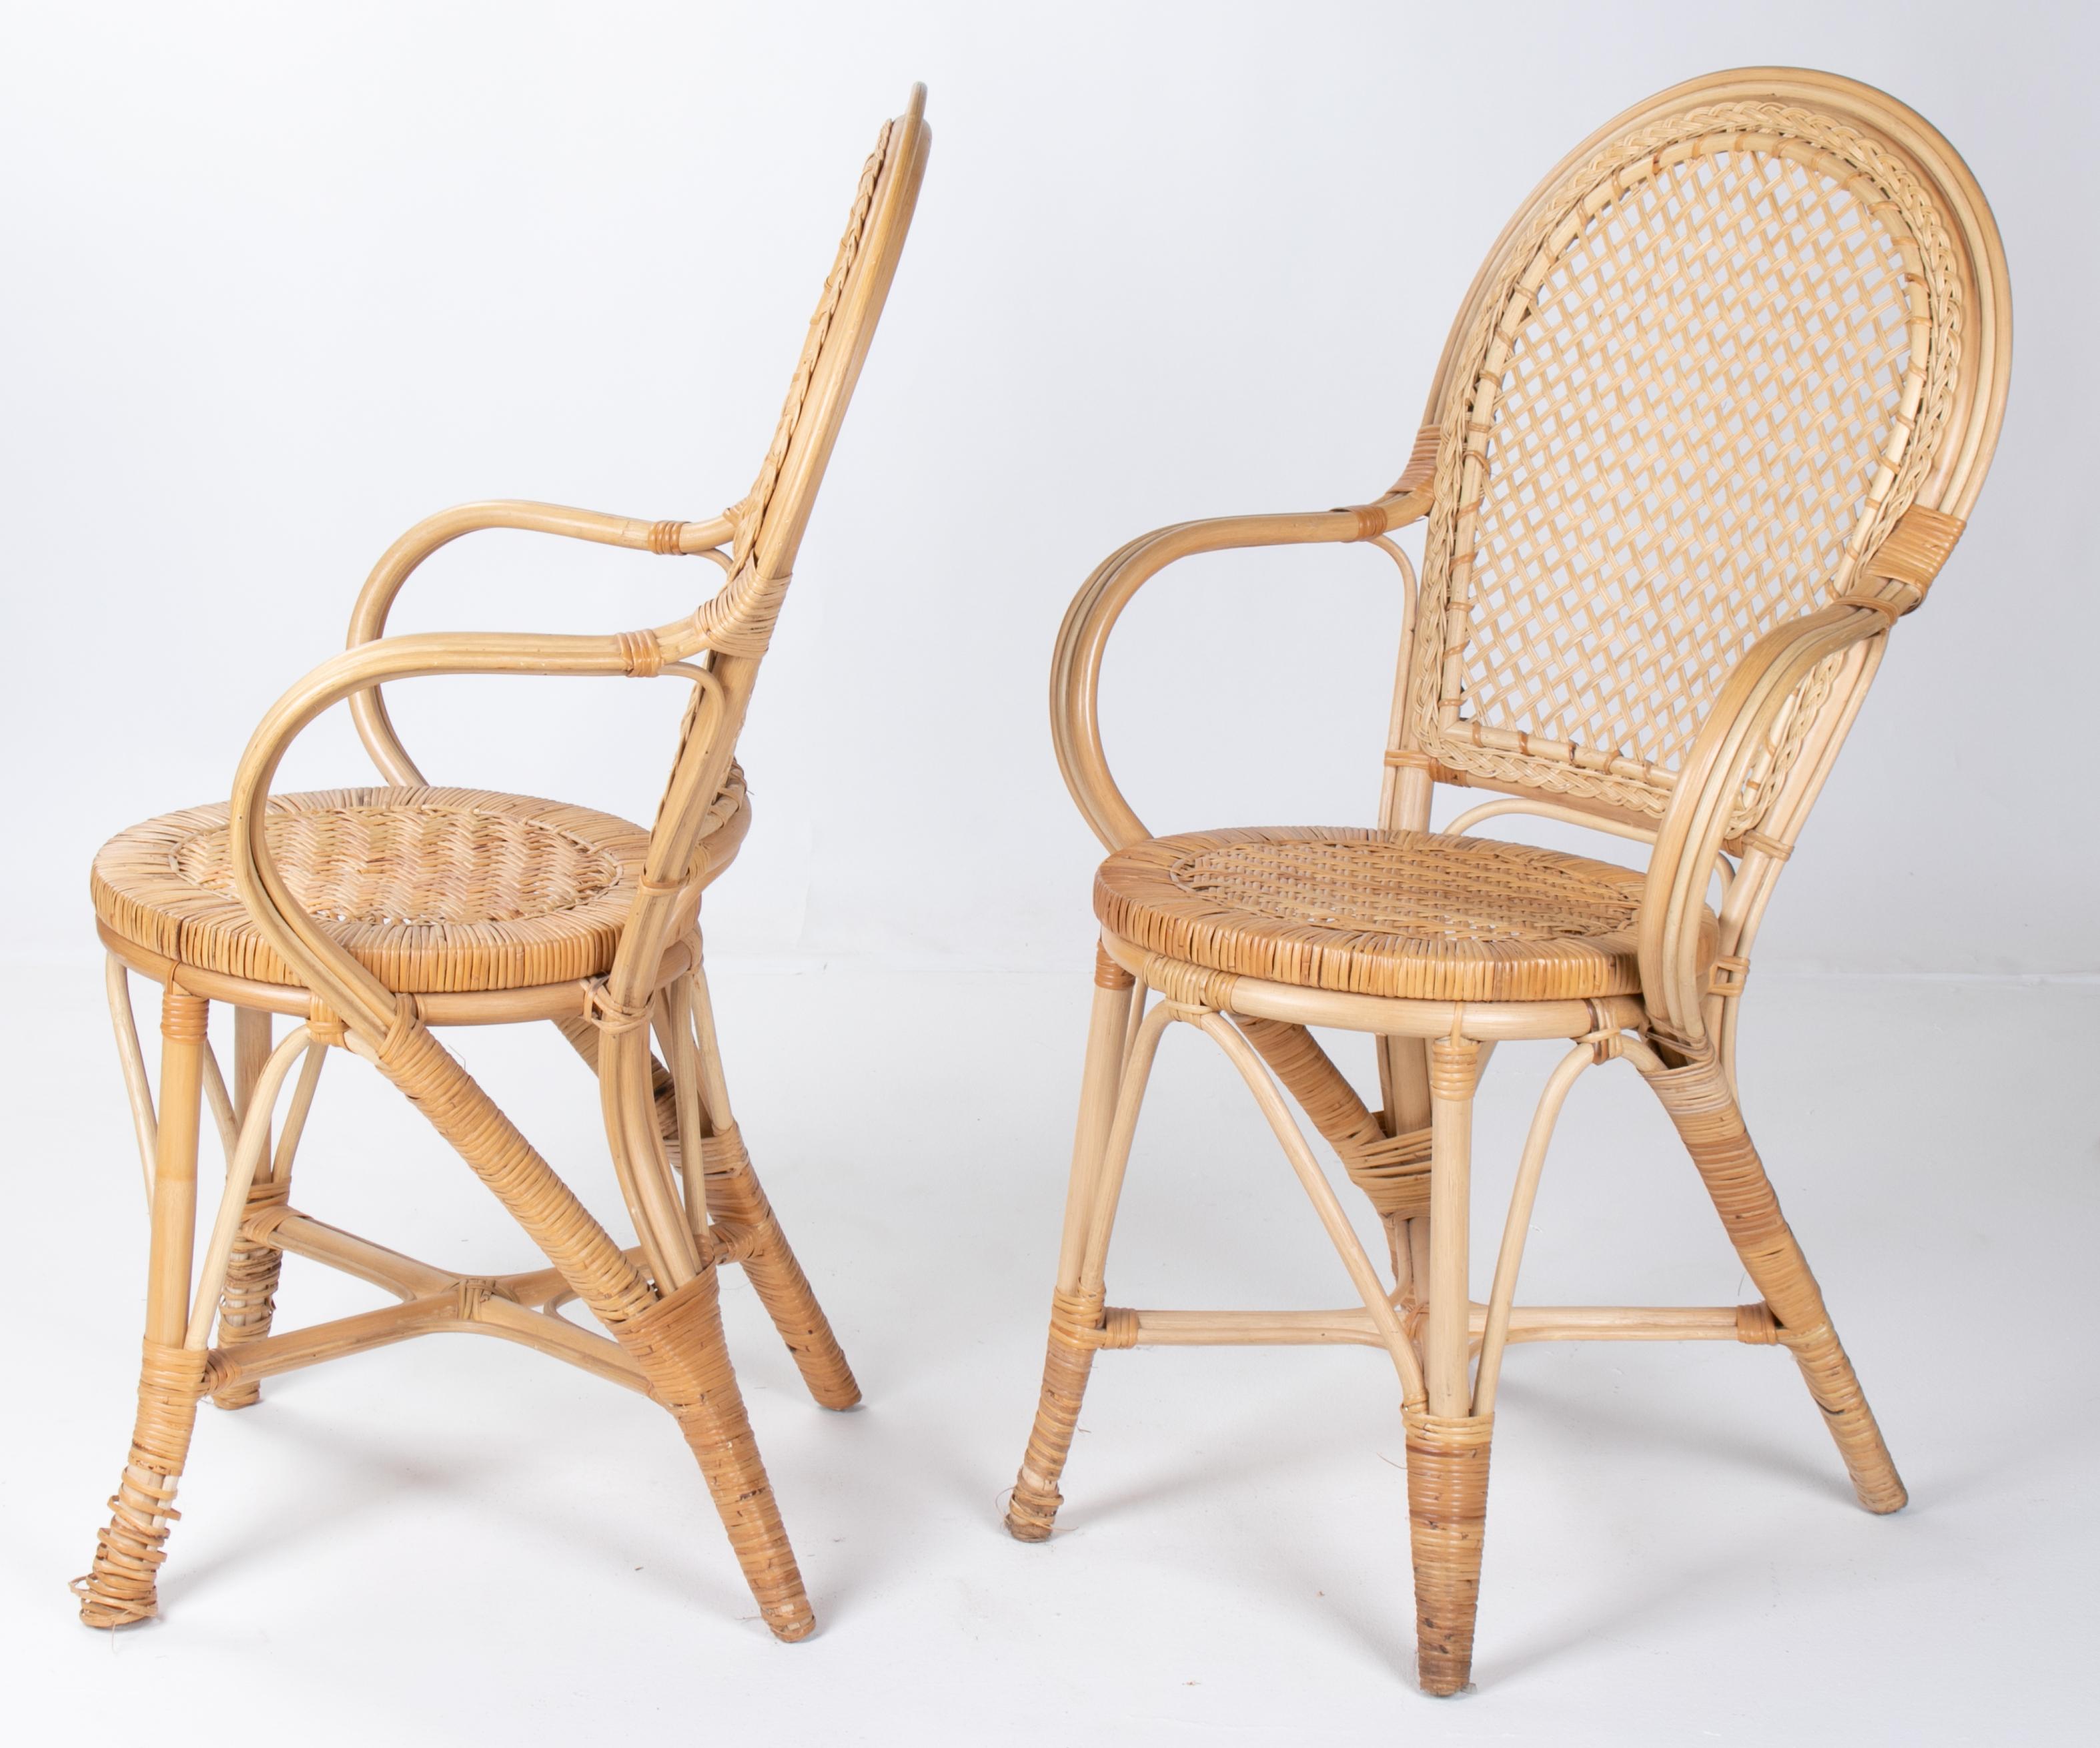 1970s pair of Spanish bamboo and wicker armchairs.